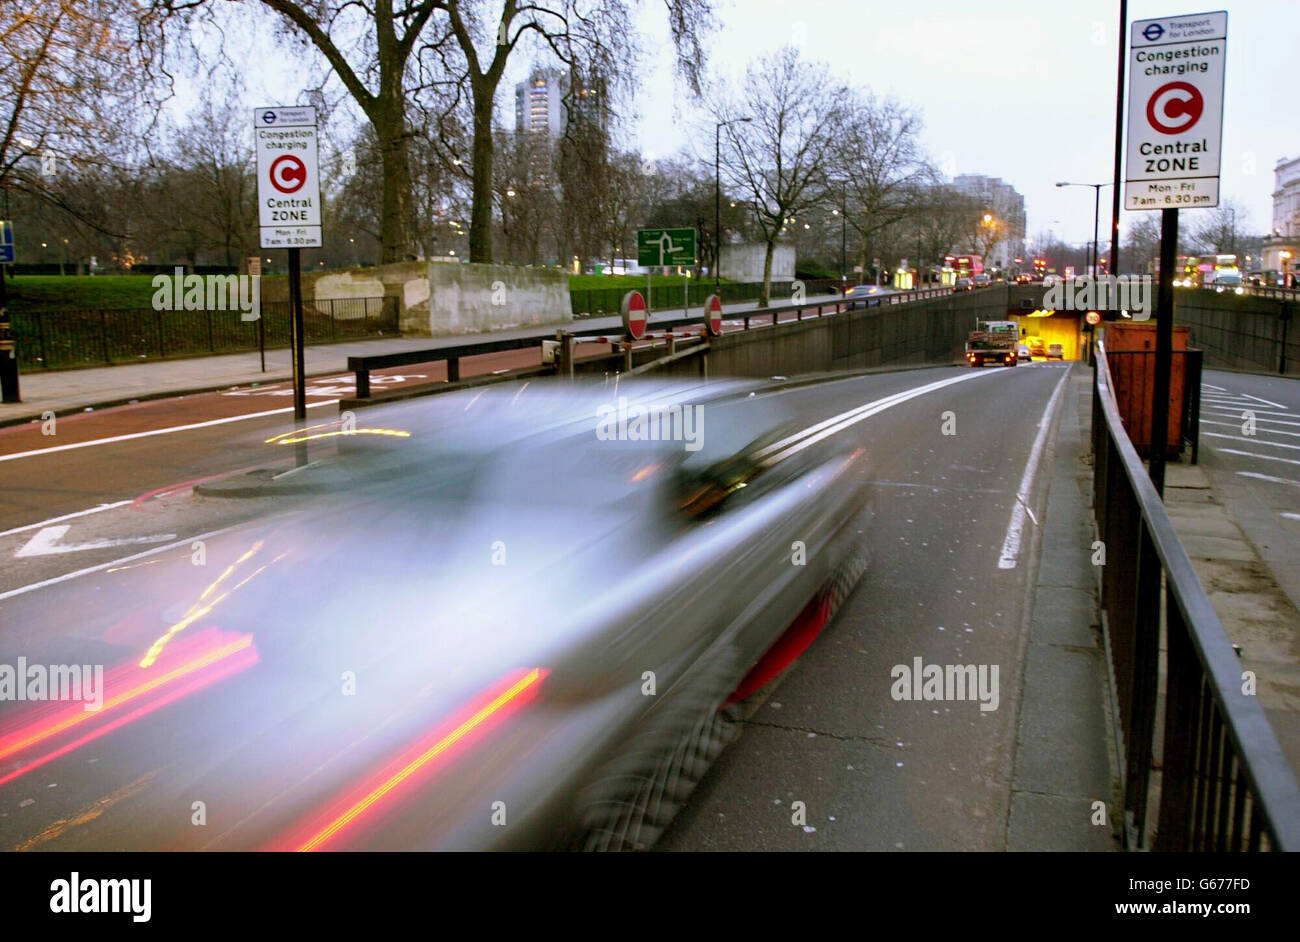 A motorist on its way into central London. From today drivers using an eight mile square zone of the capital between 0700 and 1830 Monday to Friday have to pay a 5 charge. * Their payments are monitored against digitised images recorded by an array of about 700 cameras in and on the periphery of the zone. There are discounts for drivers living within the zone, and money raised from the scheme will go towards improving public transport. 27/08/2003: Commuters are taking risks on the road to spend more time with their loved ones, according to a survey out Wednesday August 27, 2003. Most (66%) Stock Photo